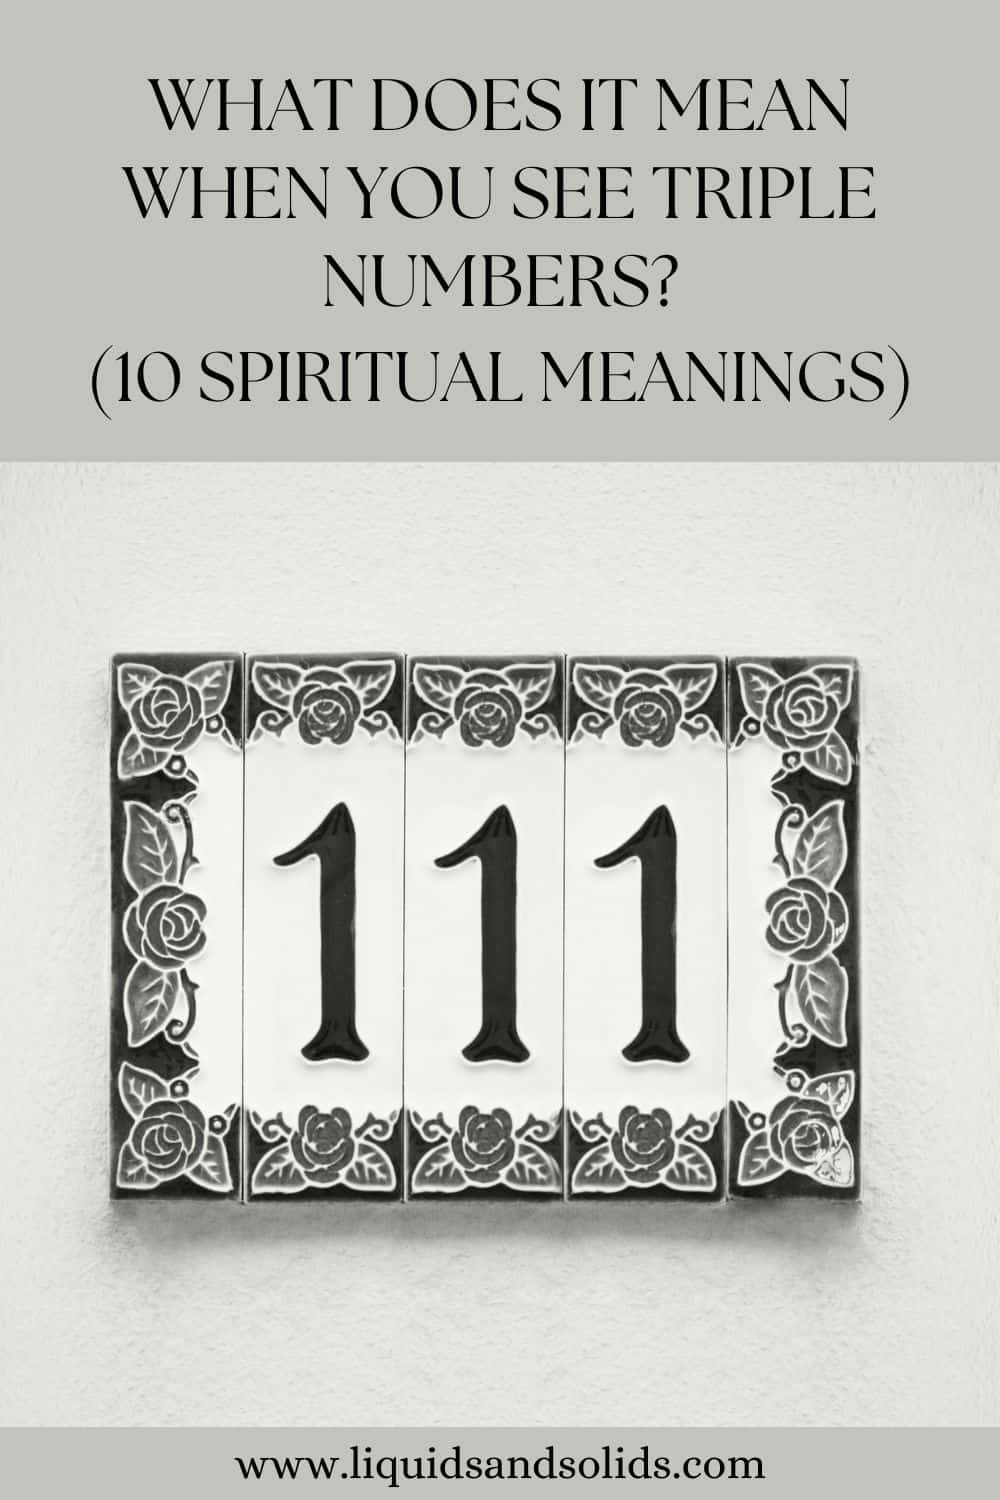 What Does It Mean When You See Triple Numbers? (10 Spiritual Meanings)